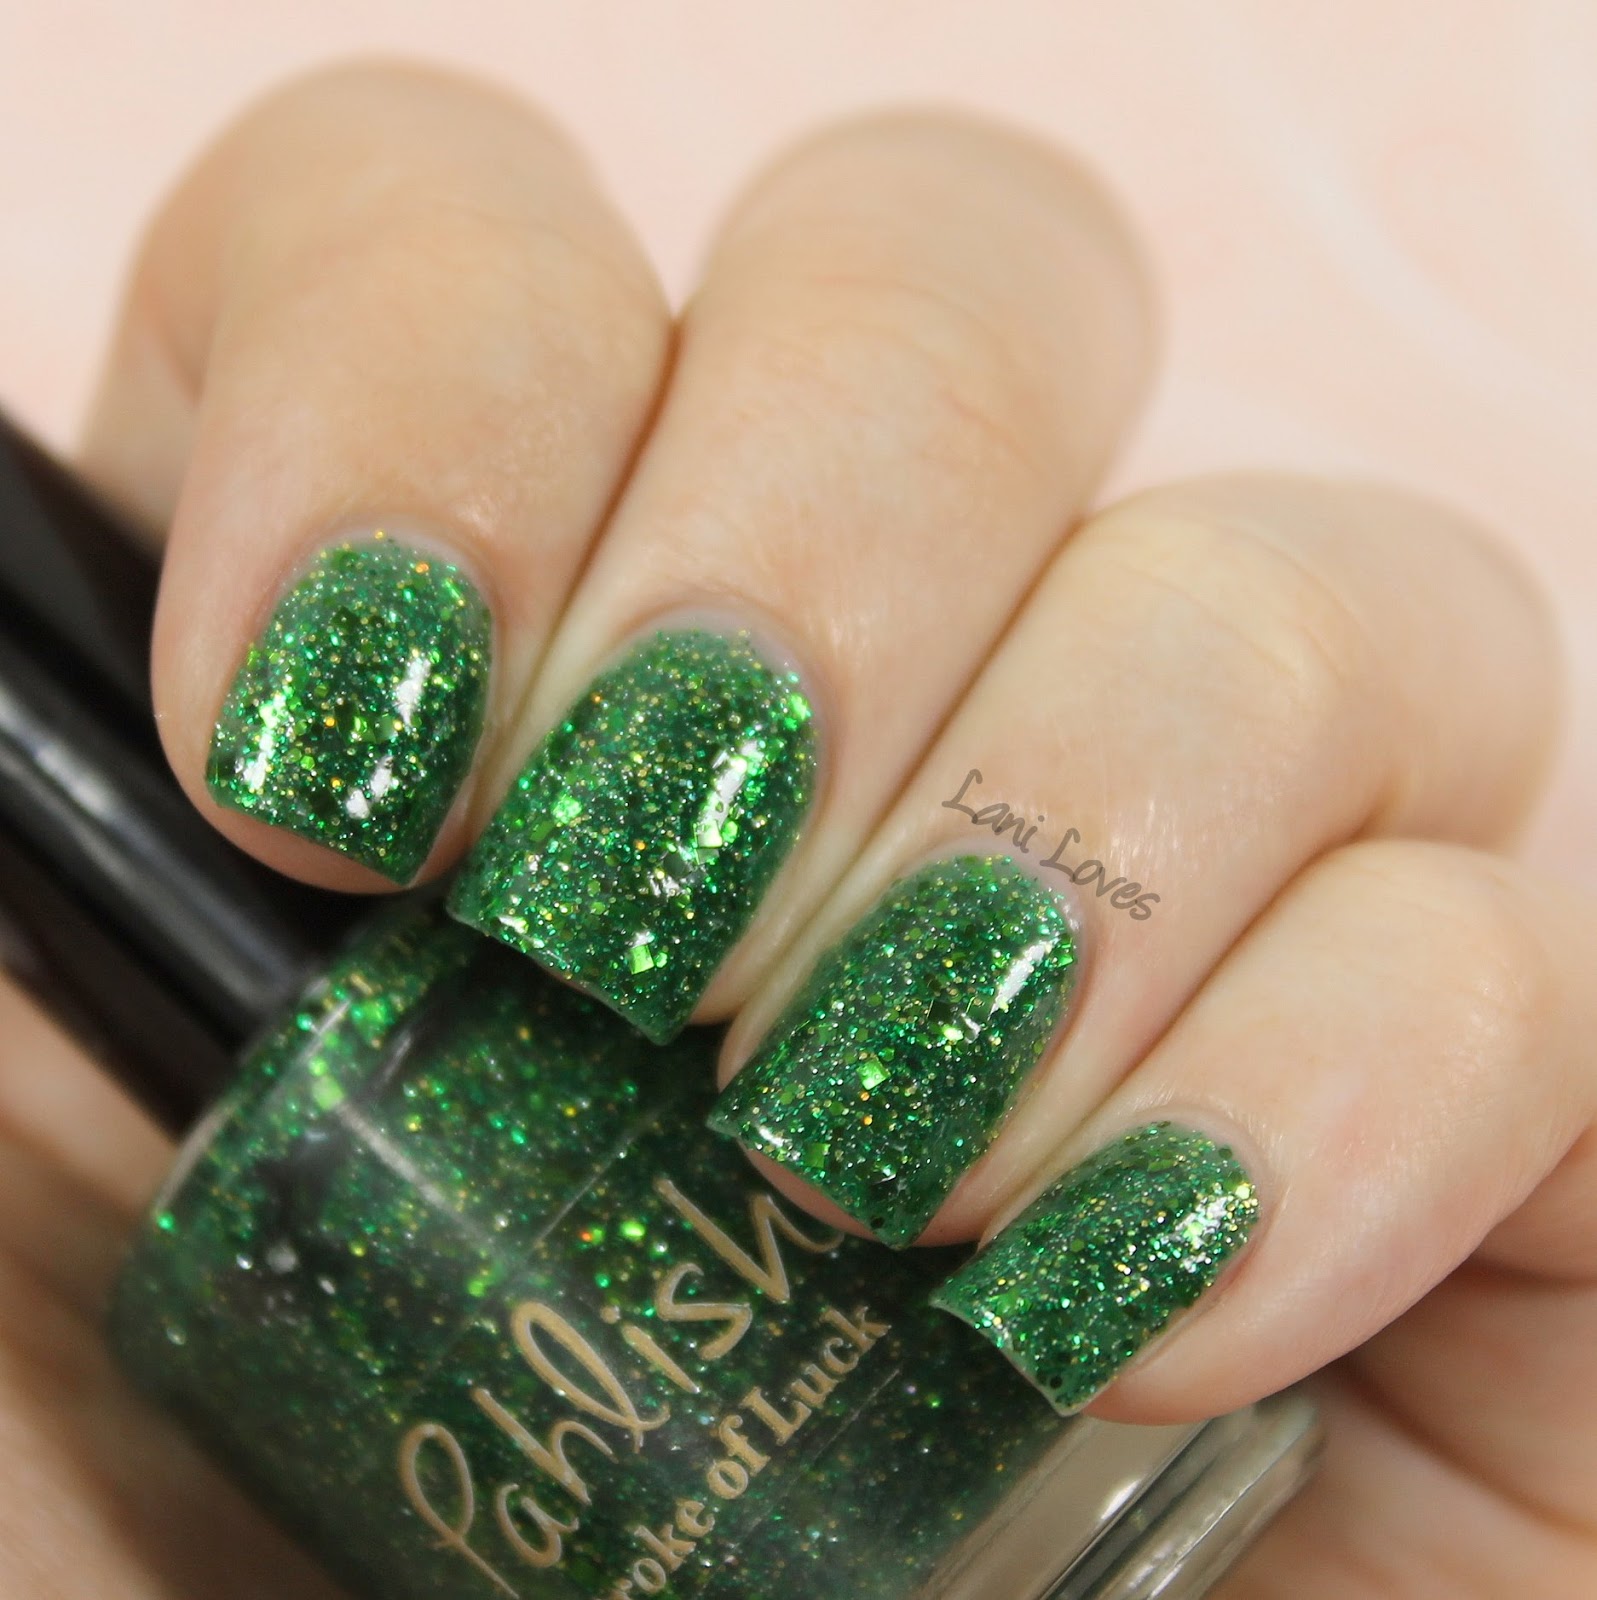 Pahlish - Stroke of Luck swatch